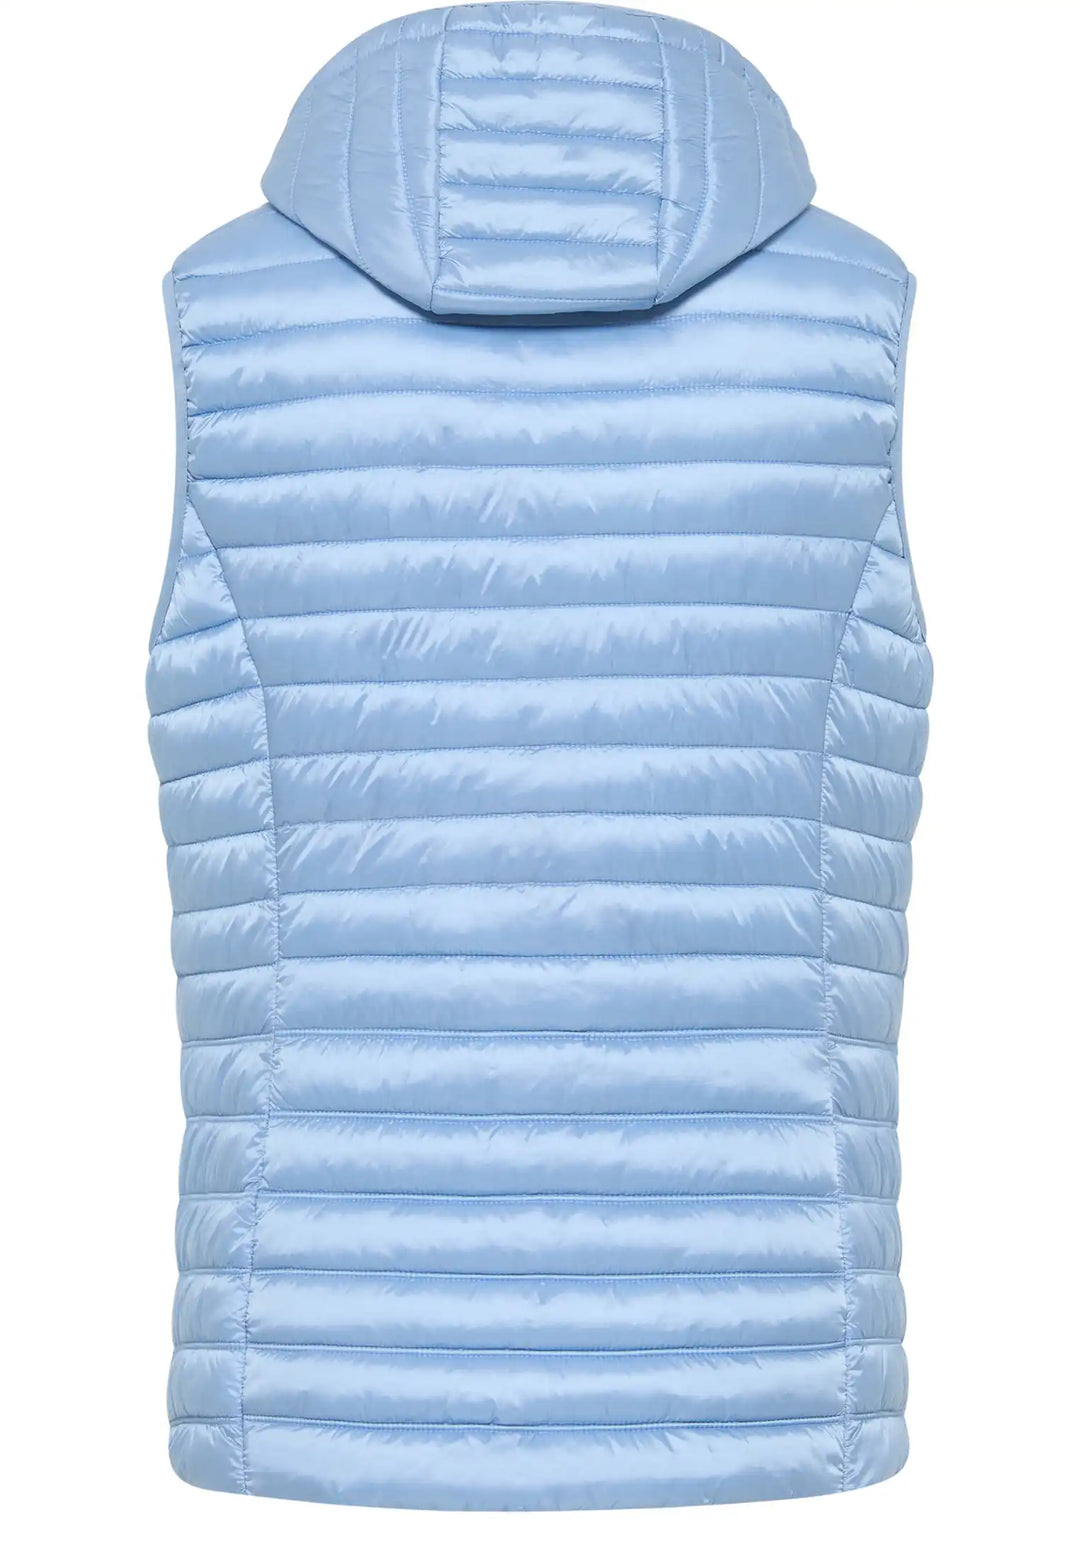 Back view of a light blue gilet with horizontal quilting and a detachable hood, designed for comfort and versatility, style 50670042-700